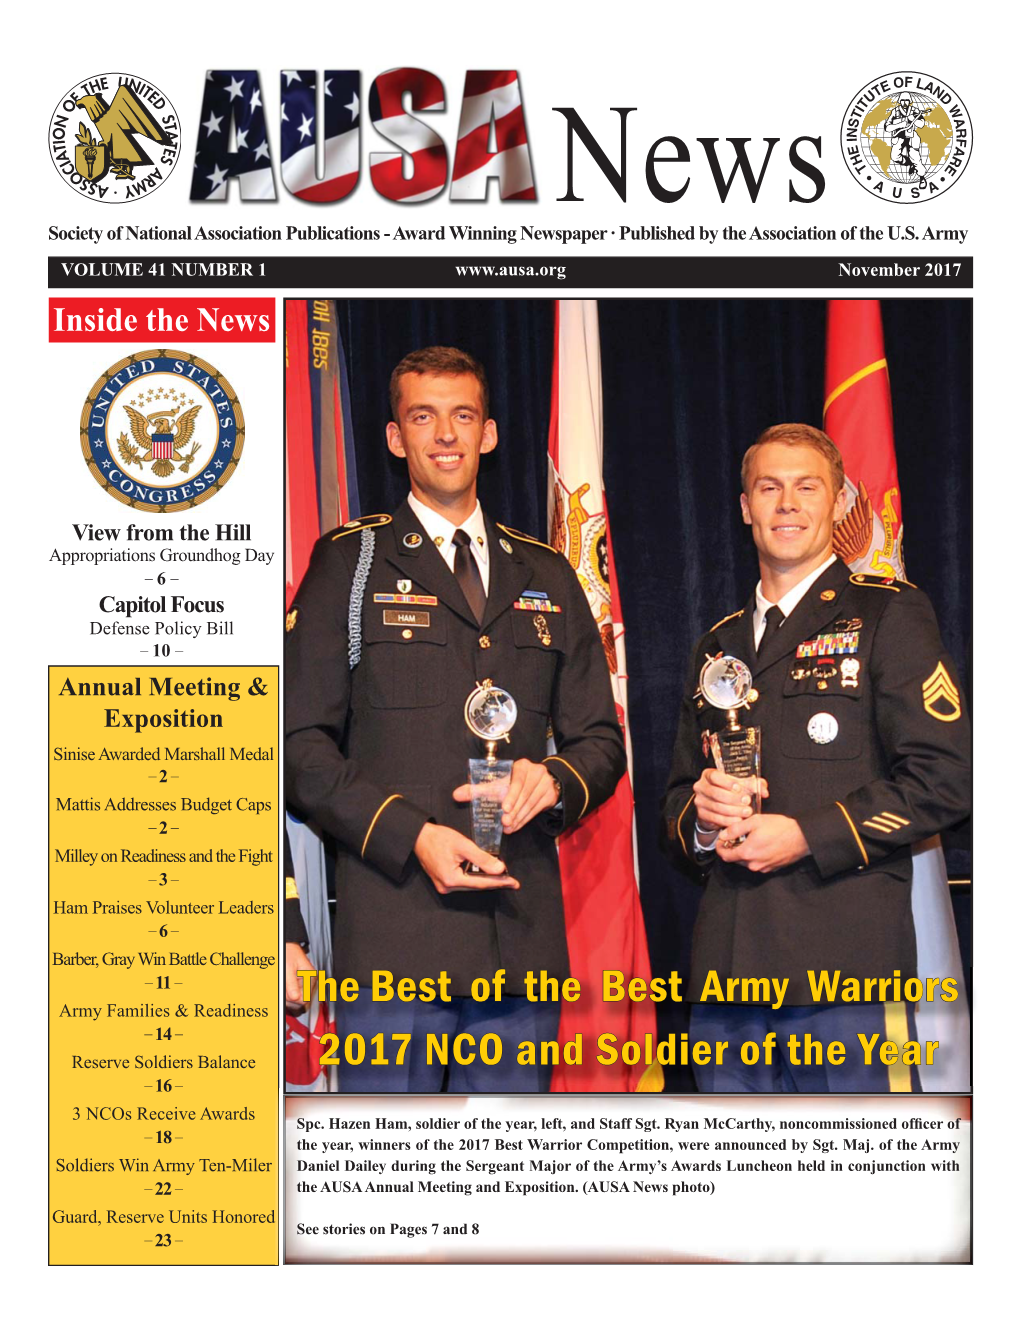 The Best of the Best Army Warriors 2017 NCO and Soldier of the Year